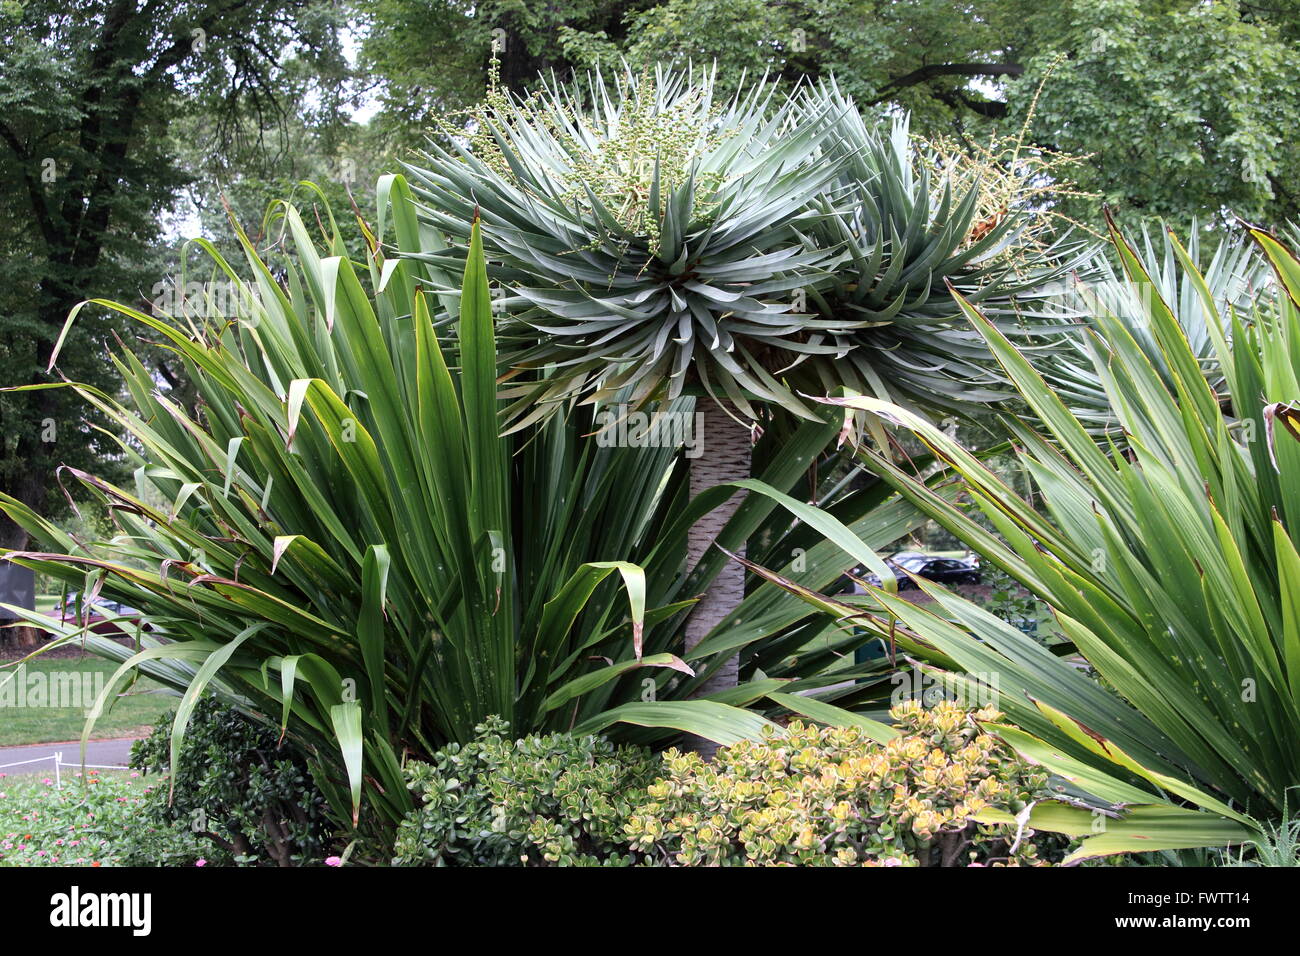 Group of desert plants like Agave, Native Gymea Lily and Jade plant at Fitzroy Garden Melbourne Victoria Australia Stock Photo